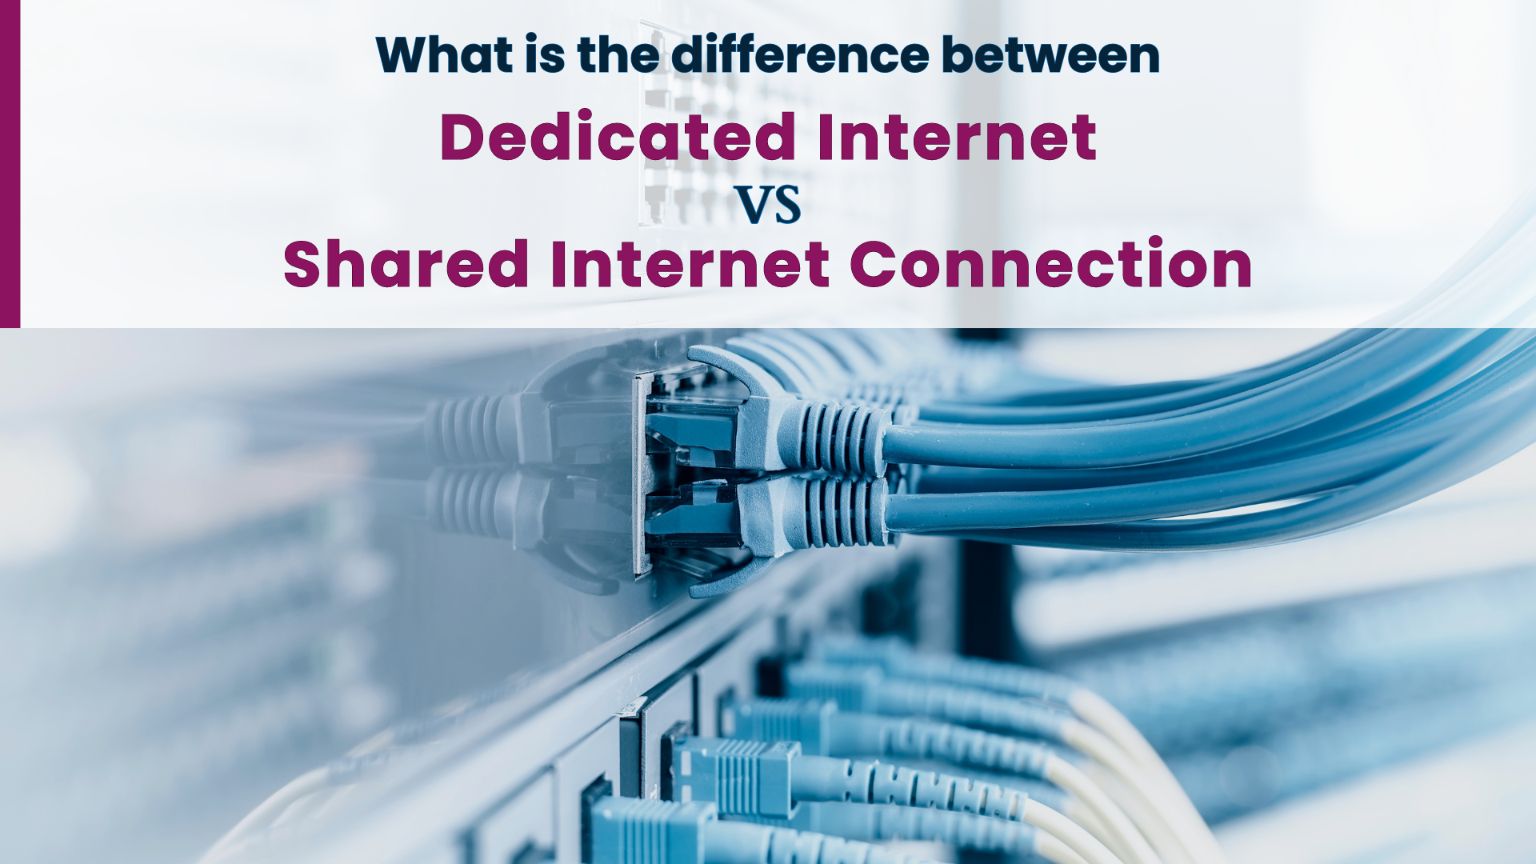 Dedicated internet vs shared internet connection